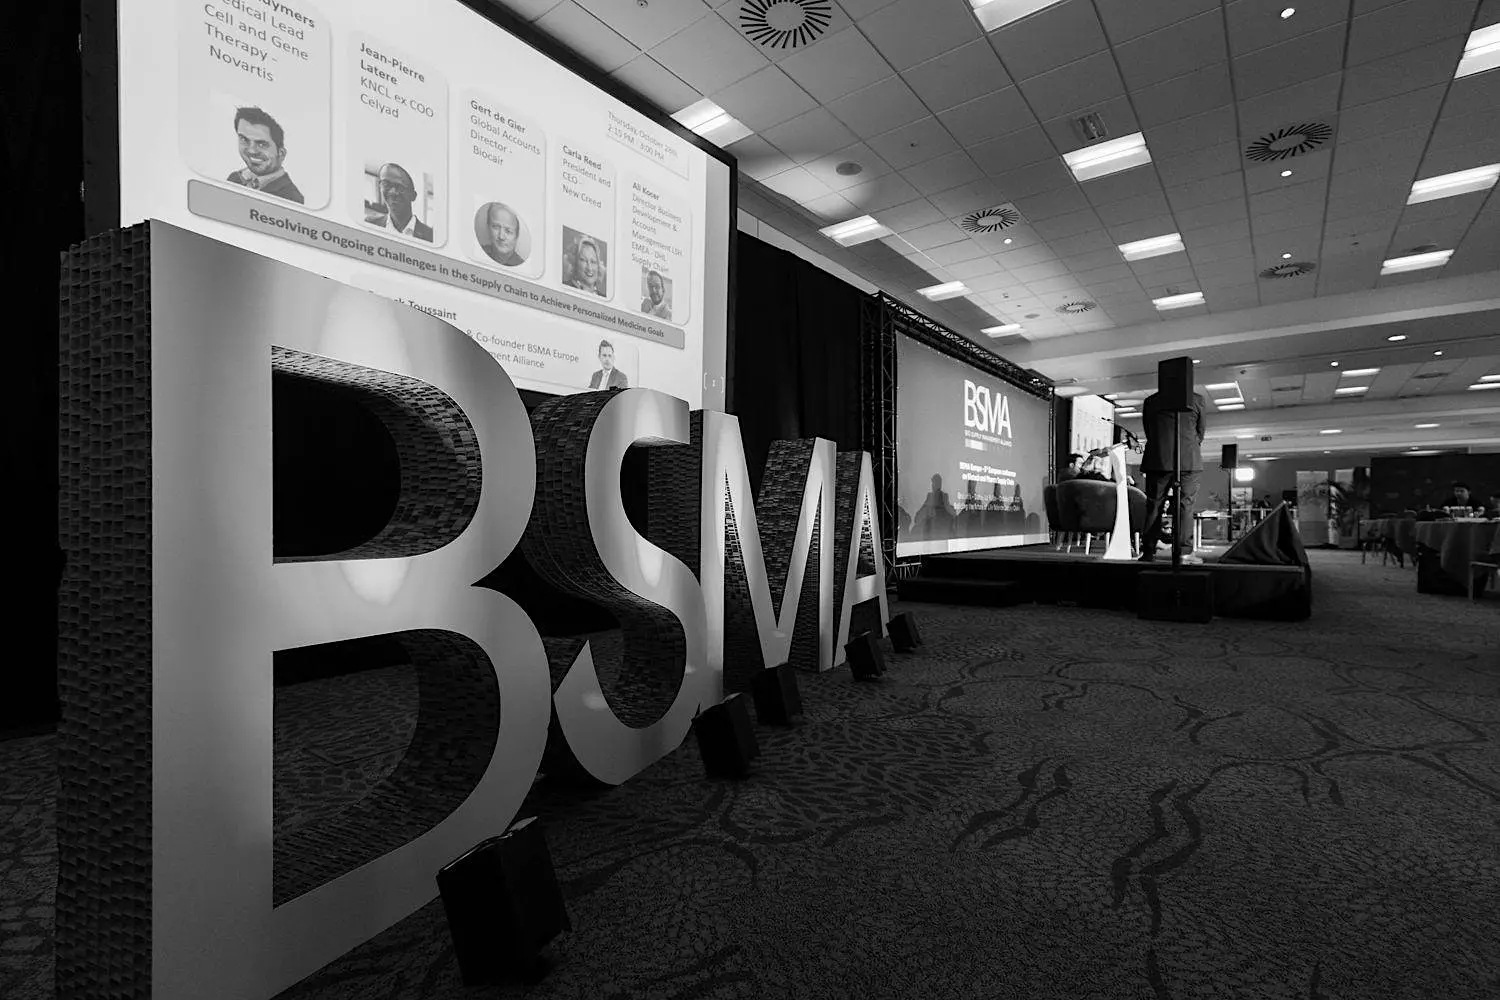 Gatherings-BSMA Europe Annual Event 2022